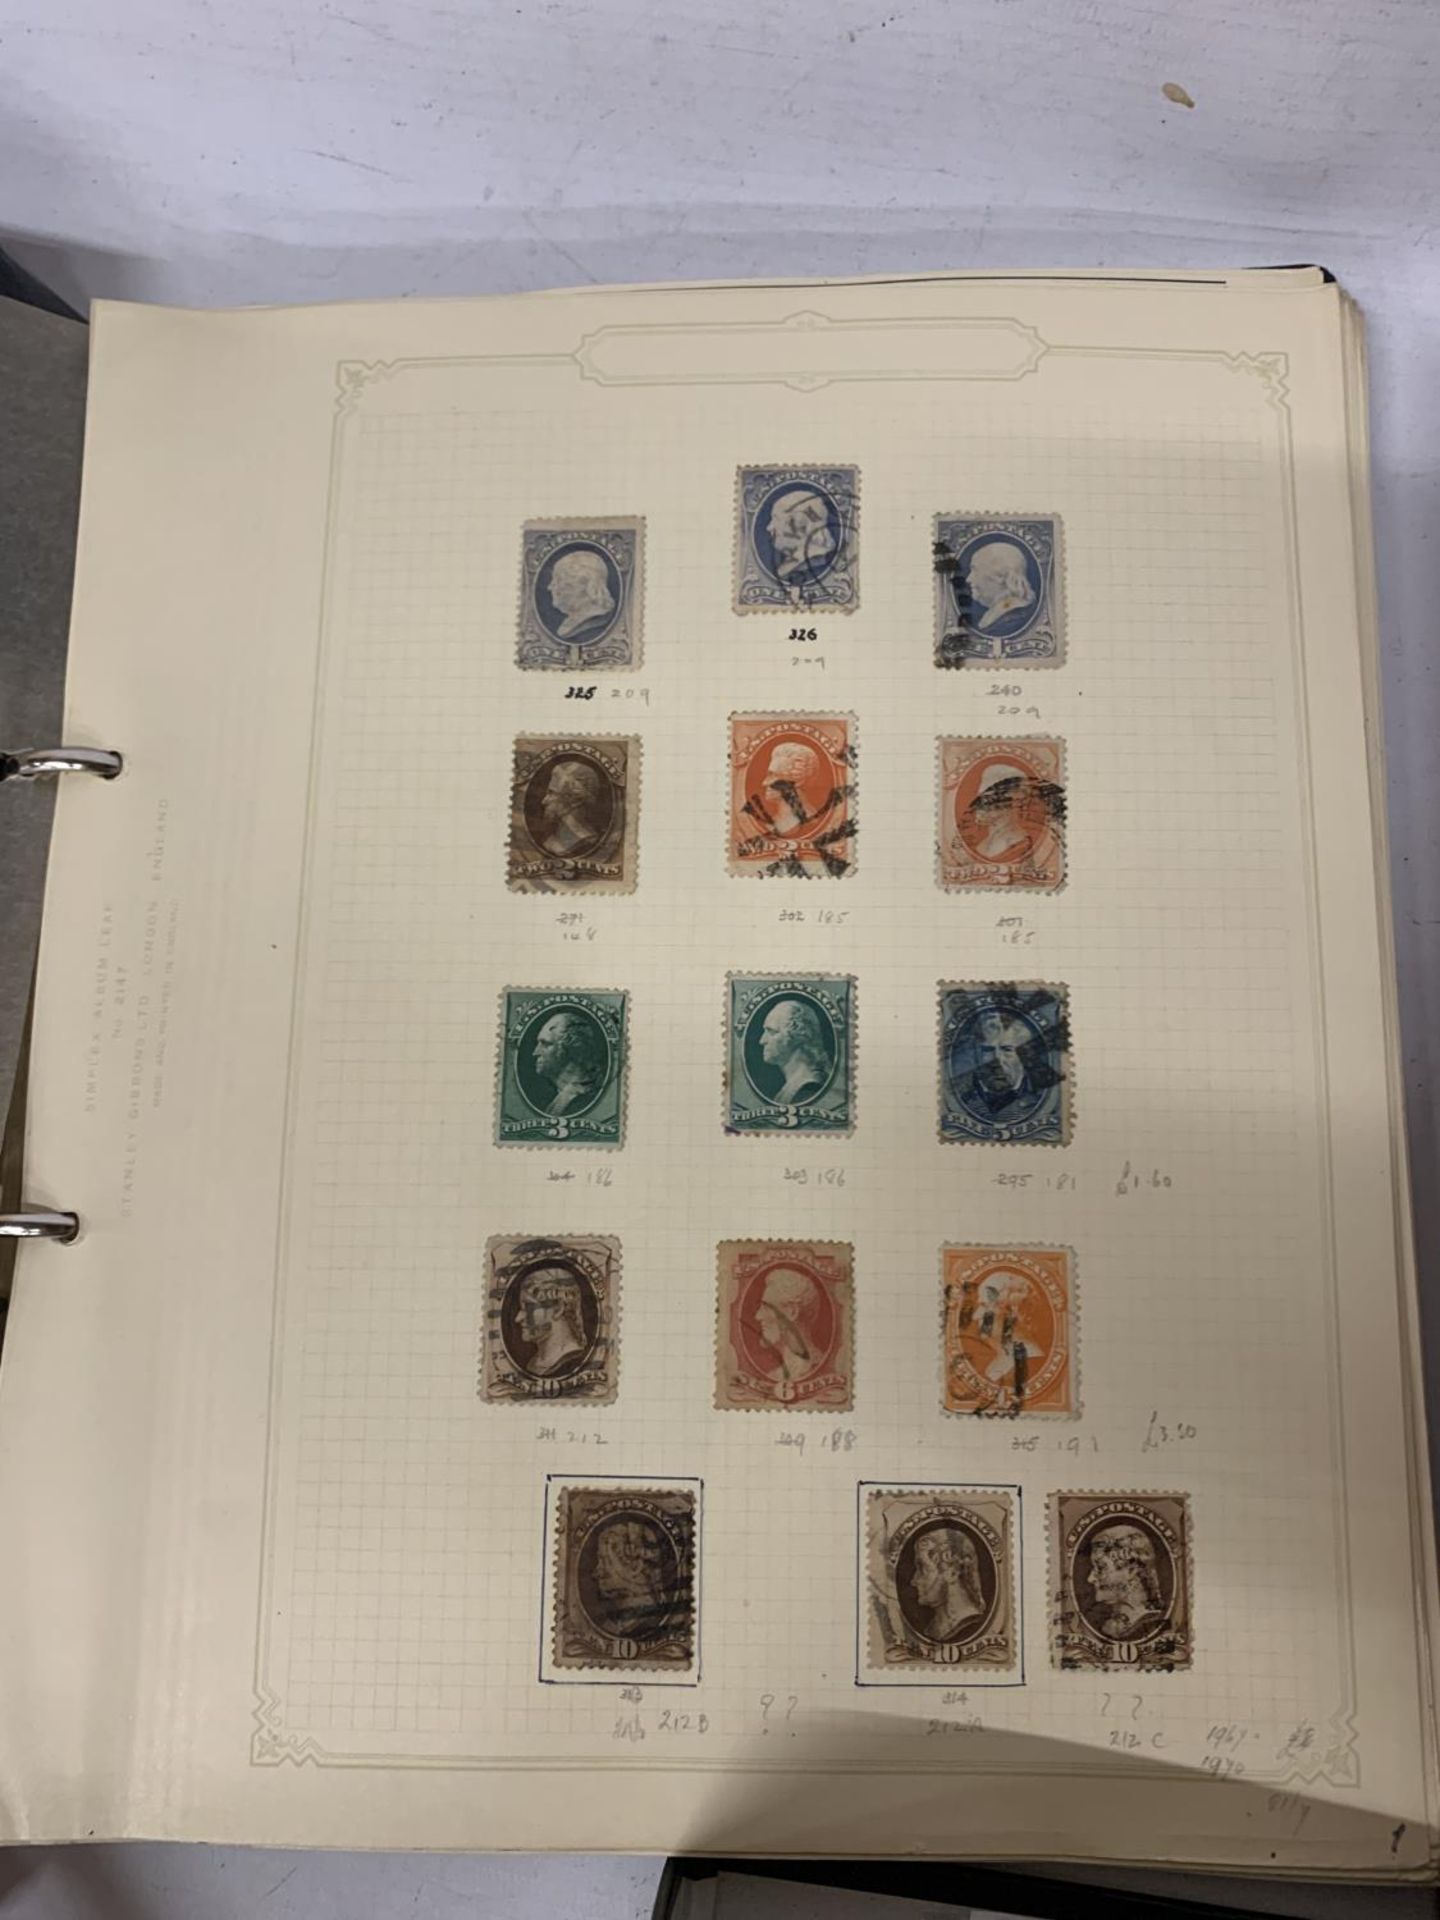 TWO FOLDERS OF AMERICAN STAMPS 1890-1978 AND A FURTHER FOLDER OF POST OFFICE SPECIAL EDITIONS - Image 6 of 7